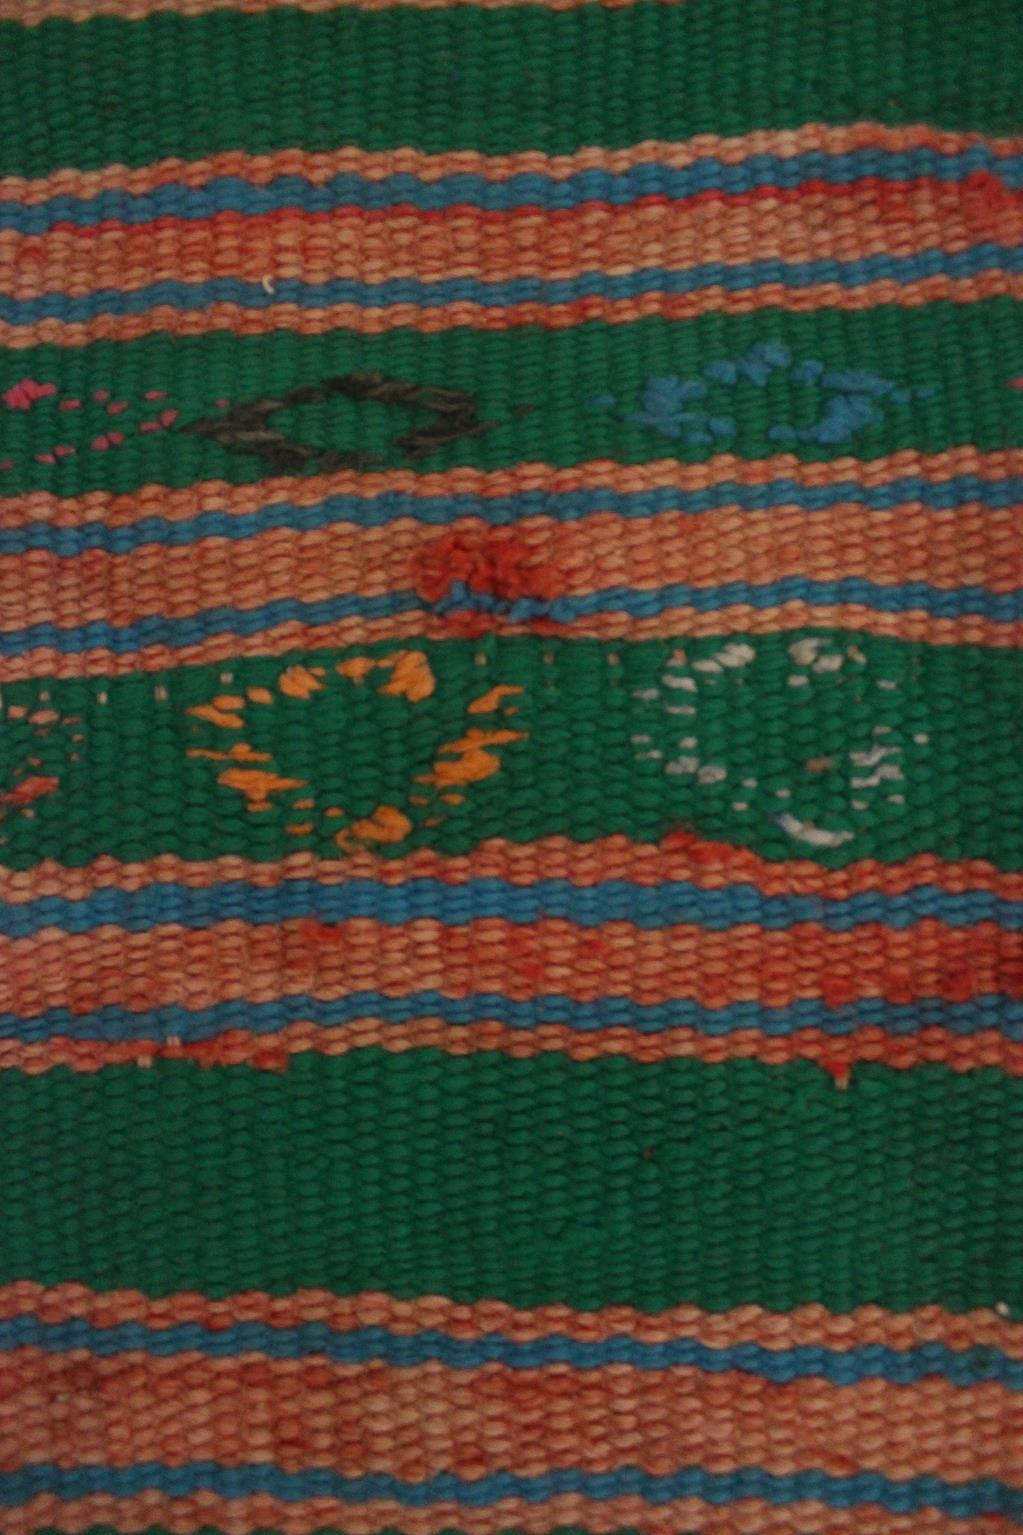 Vintage Moroccan striped kilim rug - Green/pink/red - 5.1x10.2feet / 157x312cm For Sale 6